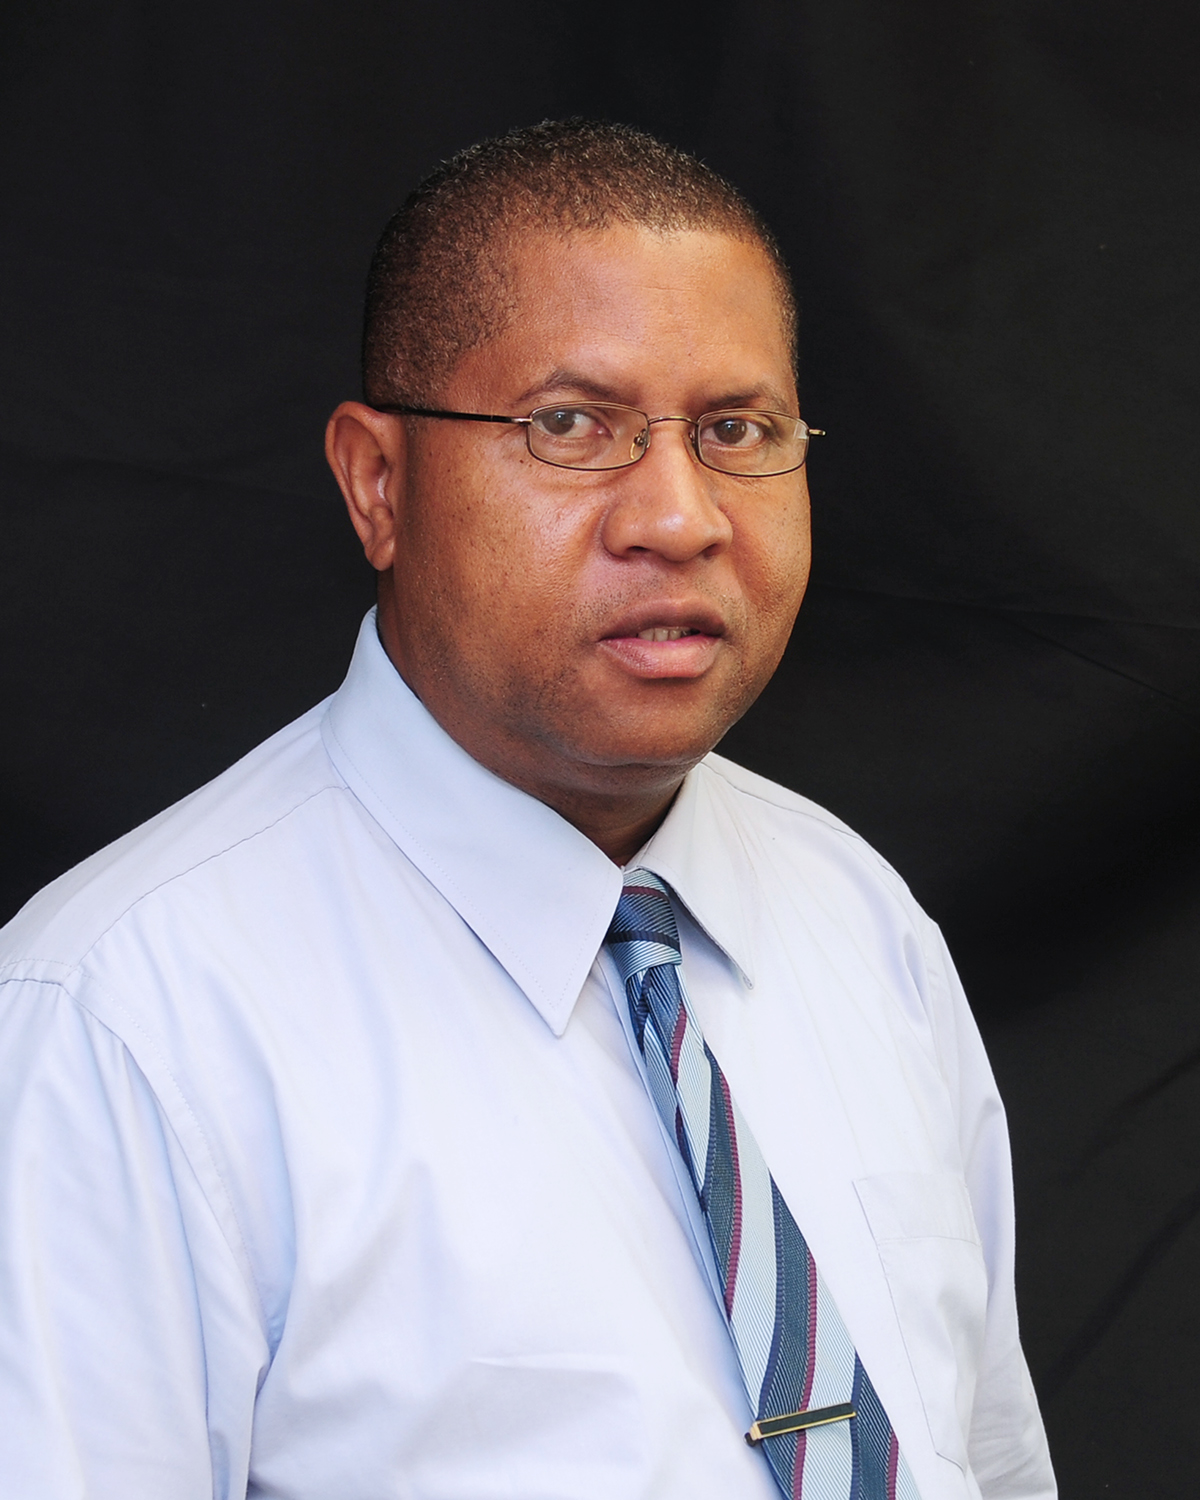 Mr. Ian Penn confirmed as chief immigration officer